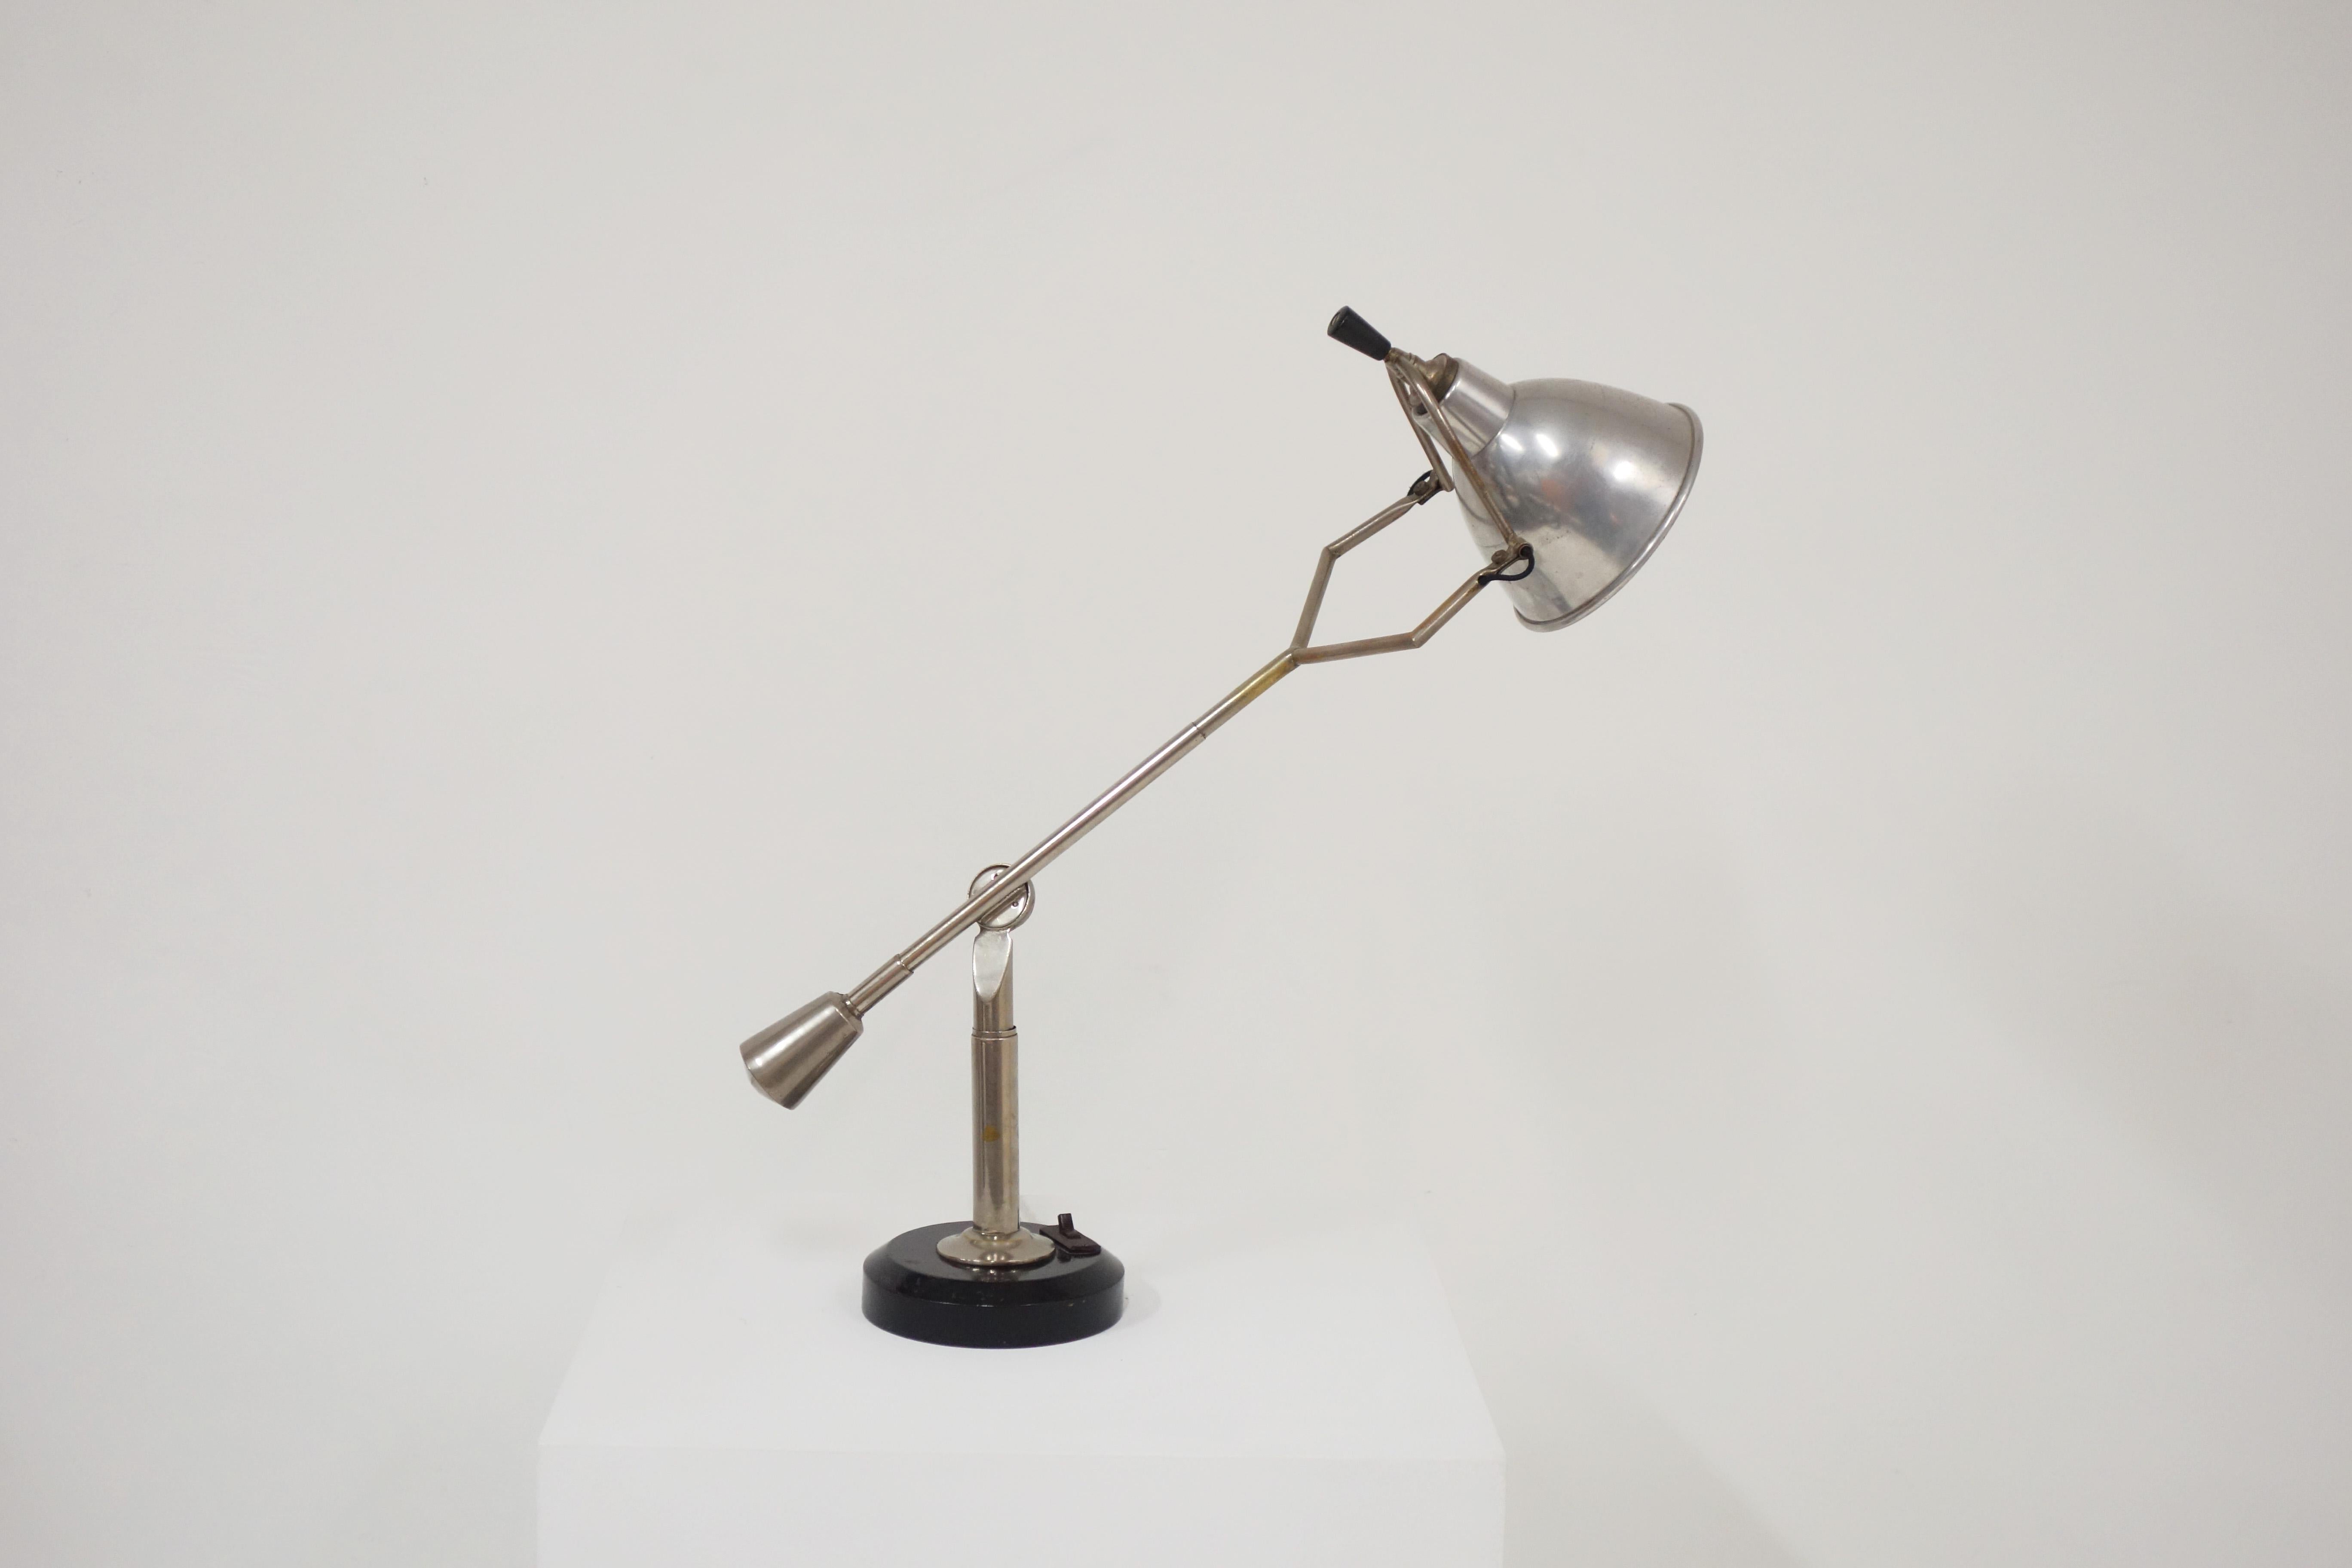 Original and vintage modernist nickel-plated counterbalance lamp by Eduard-Wilfrid Buquet, circa 1925. 
The circular base is made of lacquered wood. Original bakelite switch on the base. 
Nickel-plated for the lamp. You can easily choose the